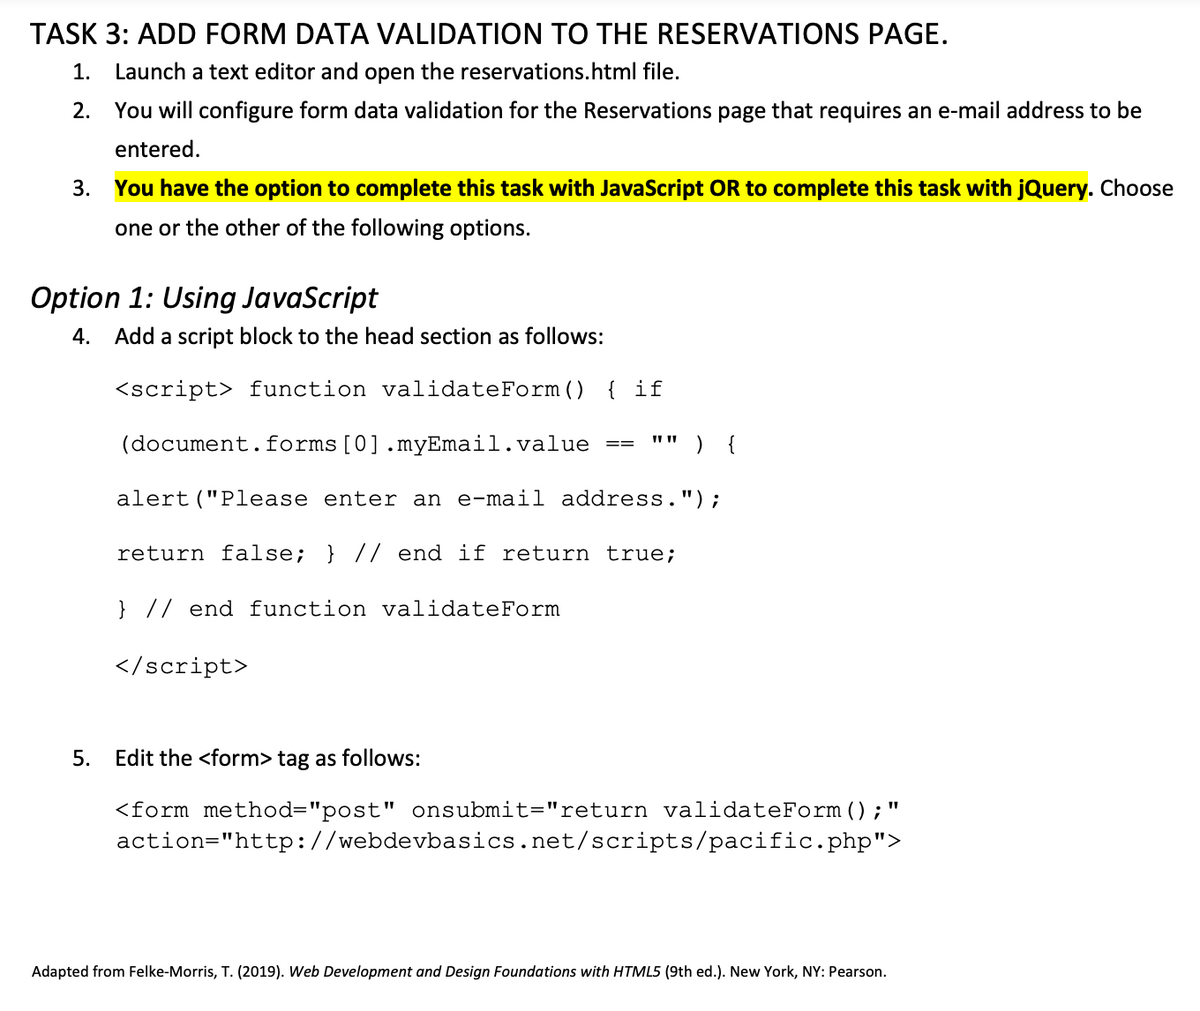 TASK 3: ADD FORM DATA VALIDATION TO THE RESERVATIONS PAGE.
1. Launch a text editor and open the reservations.html file.
2.
You will configure form data validation for the Reservations page that requires an e-mail address to be
entered.
3. You have the option to complete this task with JavaScript OR to complete this task with jQuery. Choose
one or the other of the following options.
Option 1: Using JavaScript
4. Add a script block to the head section as follows:
<script> function validateForm () { if
(document.forms [0].myEmail.value
alert ("Please enter an e-mail address.");
return false; } // end if return true;
} // end function validateForm
==
</script>
) {
5. Edit the <form> tag as follows:
11
<form method="post" onsubmit="return validateForm (); '
action="http://webdevbasics.net/scripts/pacific.php">
Adapted from Felke-Morris, T. (2019). Web Development and Design Foundations with HTML5 (9th ed.). New York, NY: Pearson.